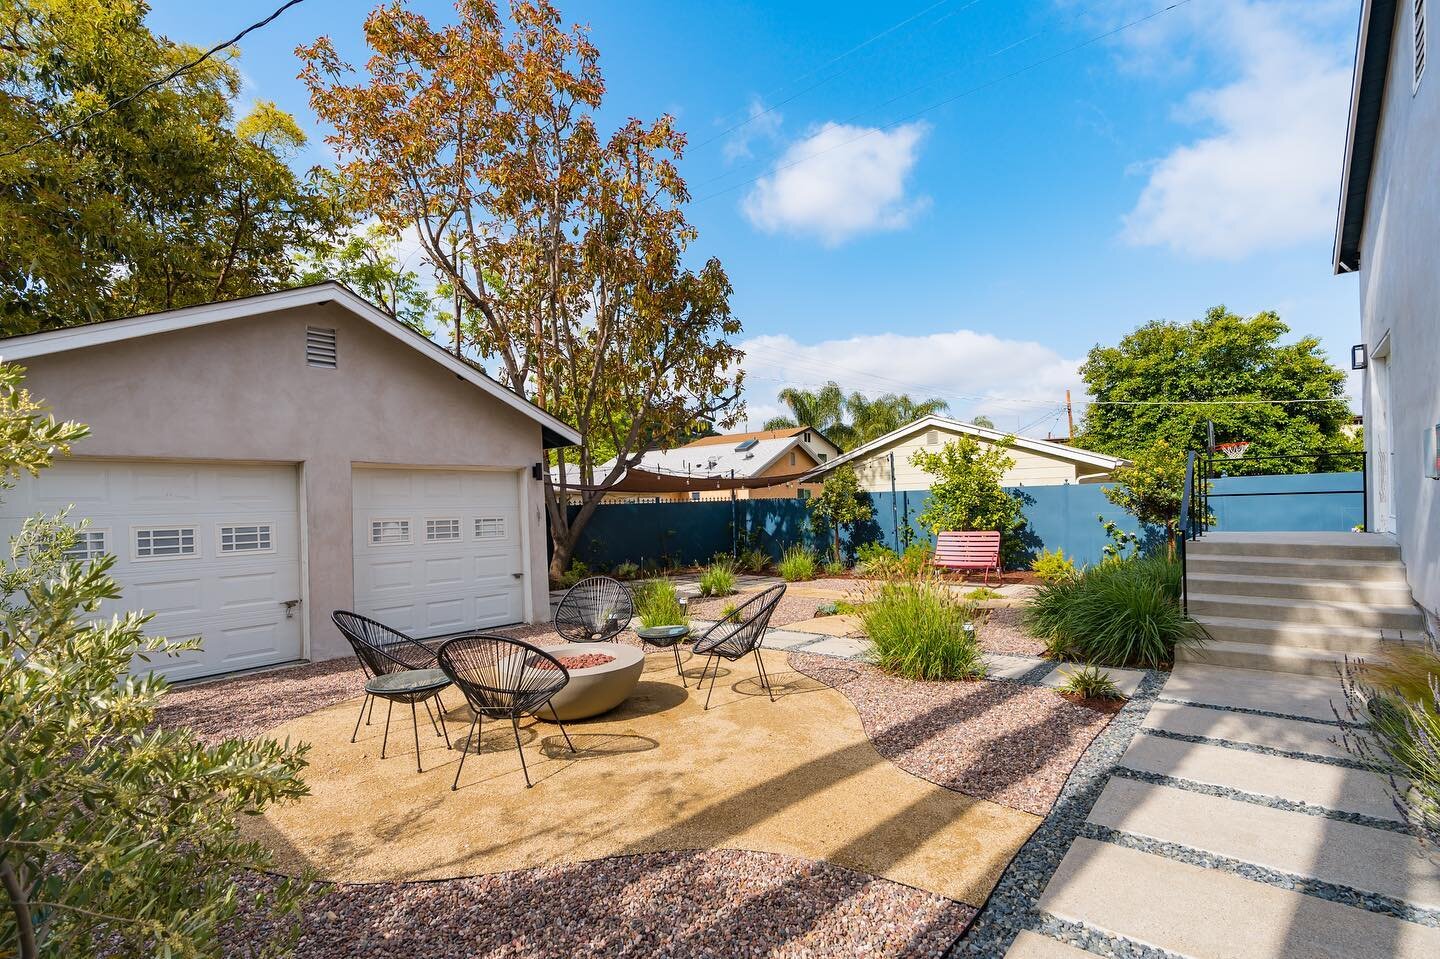 ✨JUST LISTED FOR LEASE ✨ 

Welcome to this bright and cozy home in the sought-after Eagle Rock neighborhood. Fully furnished and equipped, all you need to bring is your clothes and toothbrush! 

Situated moments away from popular Colorado Blvd, this 